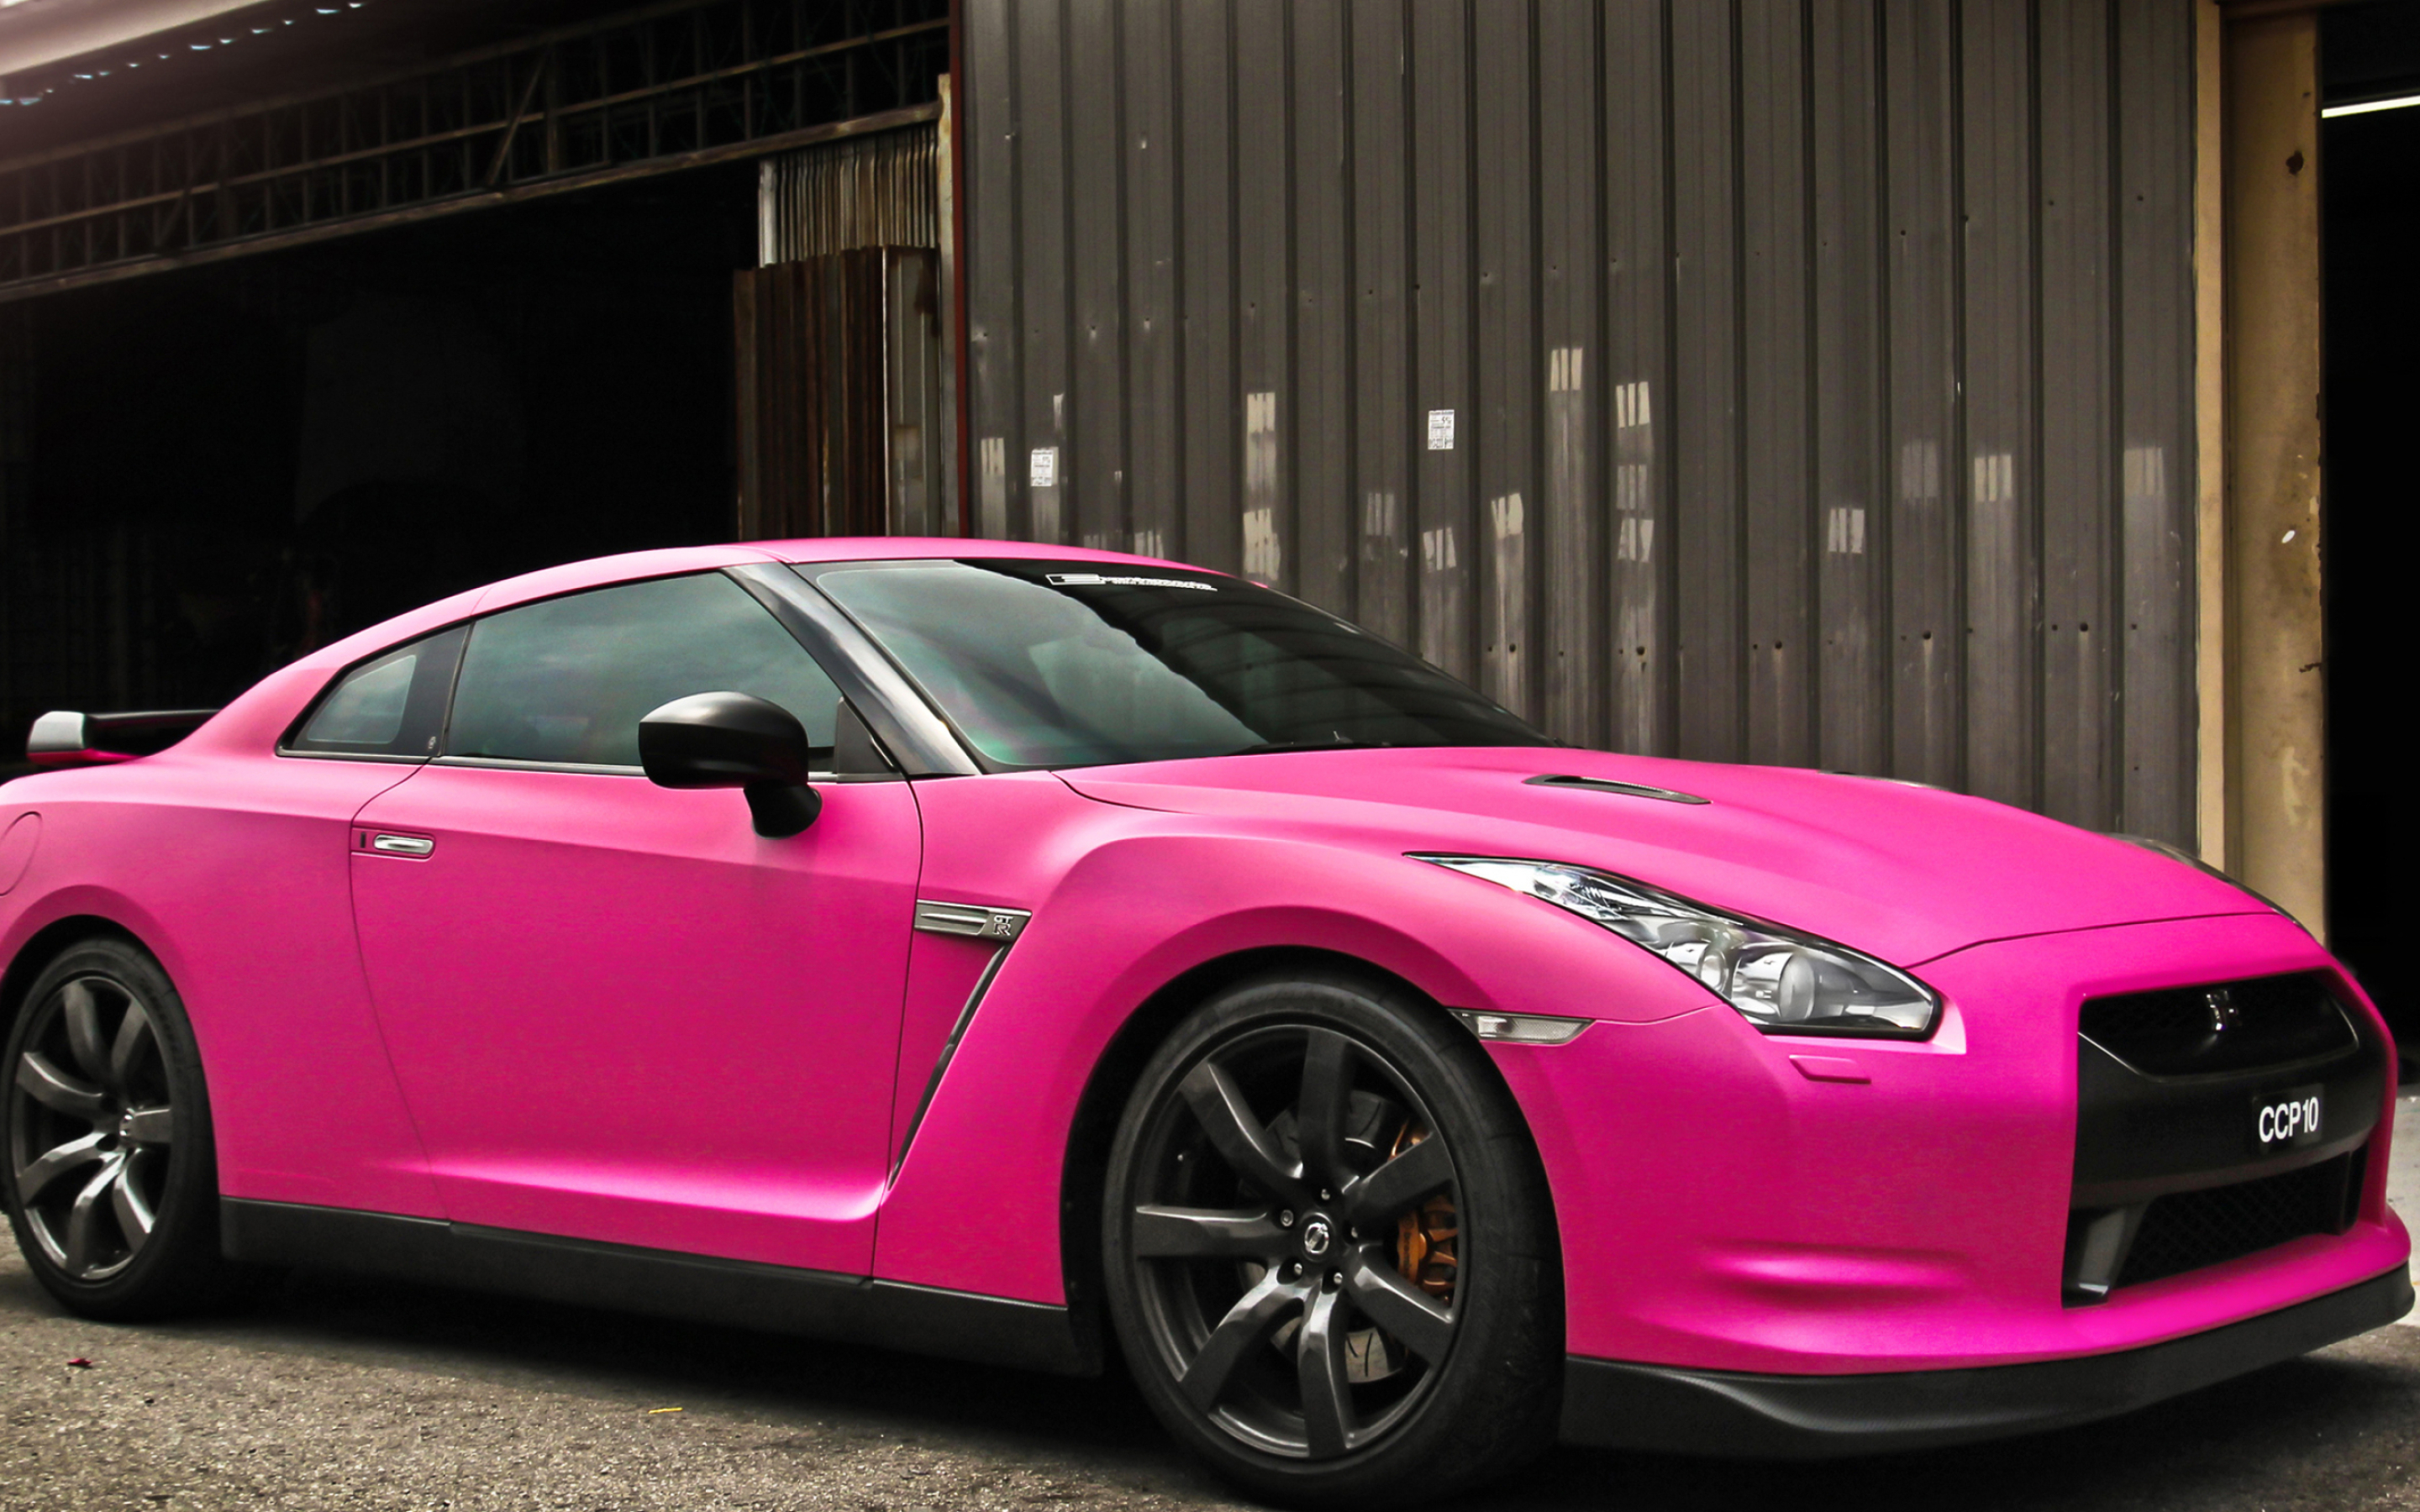 2880x1800 10+ Pink Car HD Wallpapers and Backgrounds